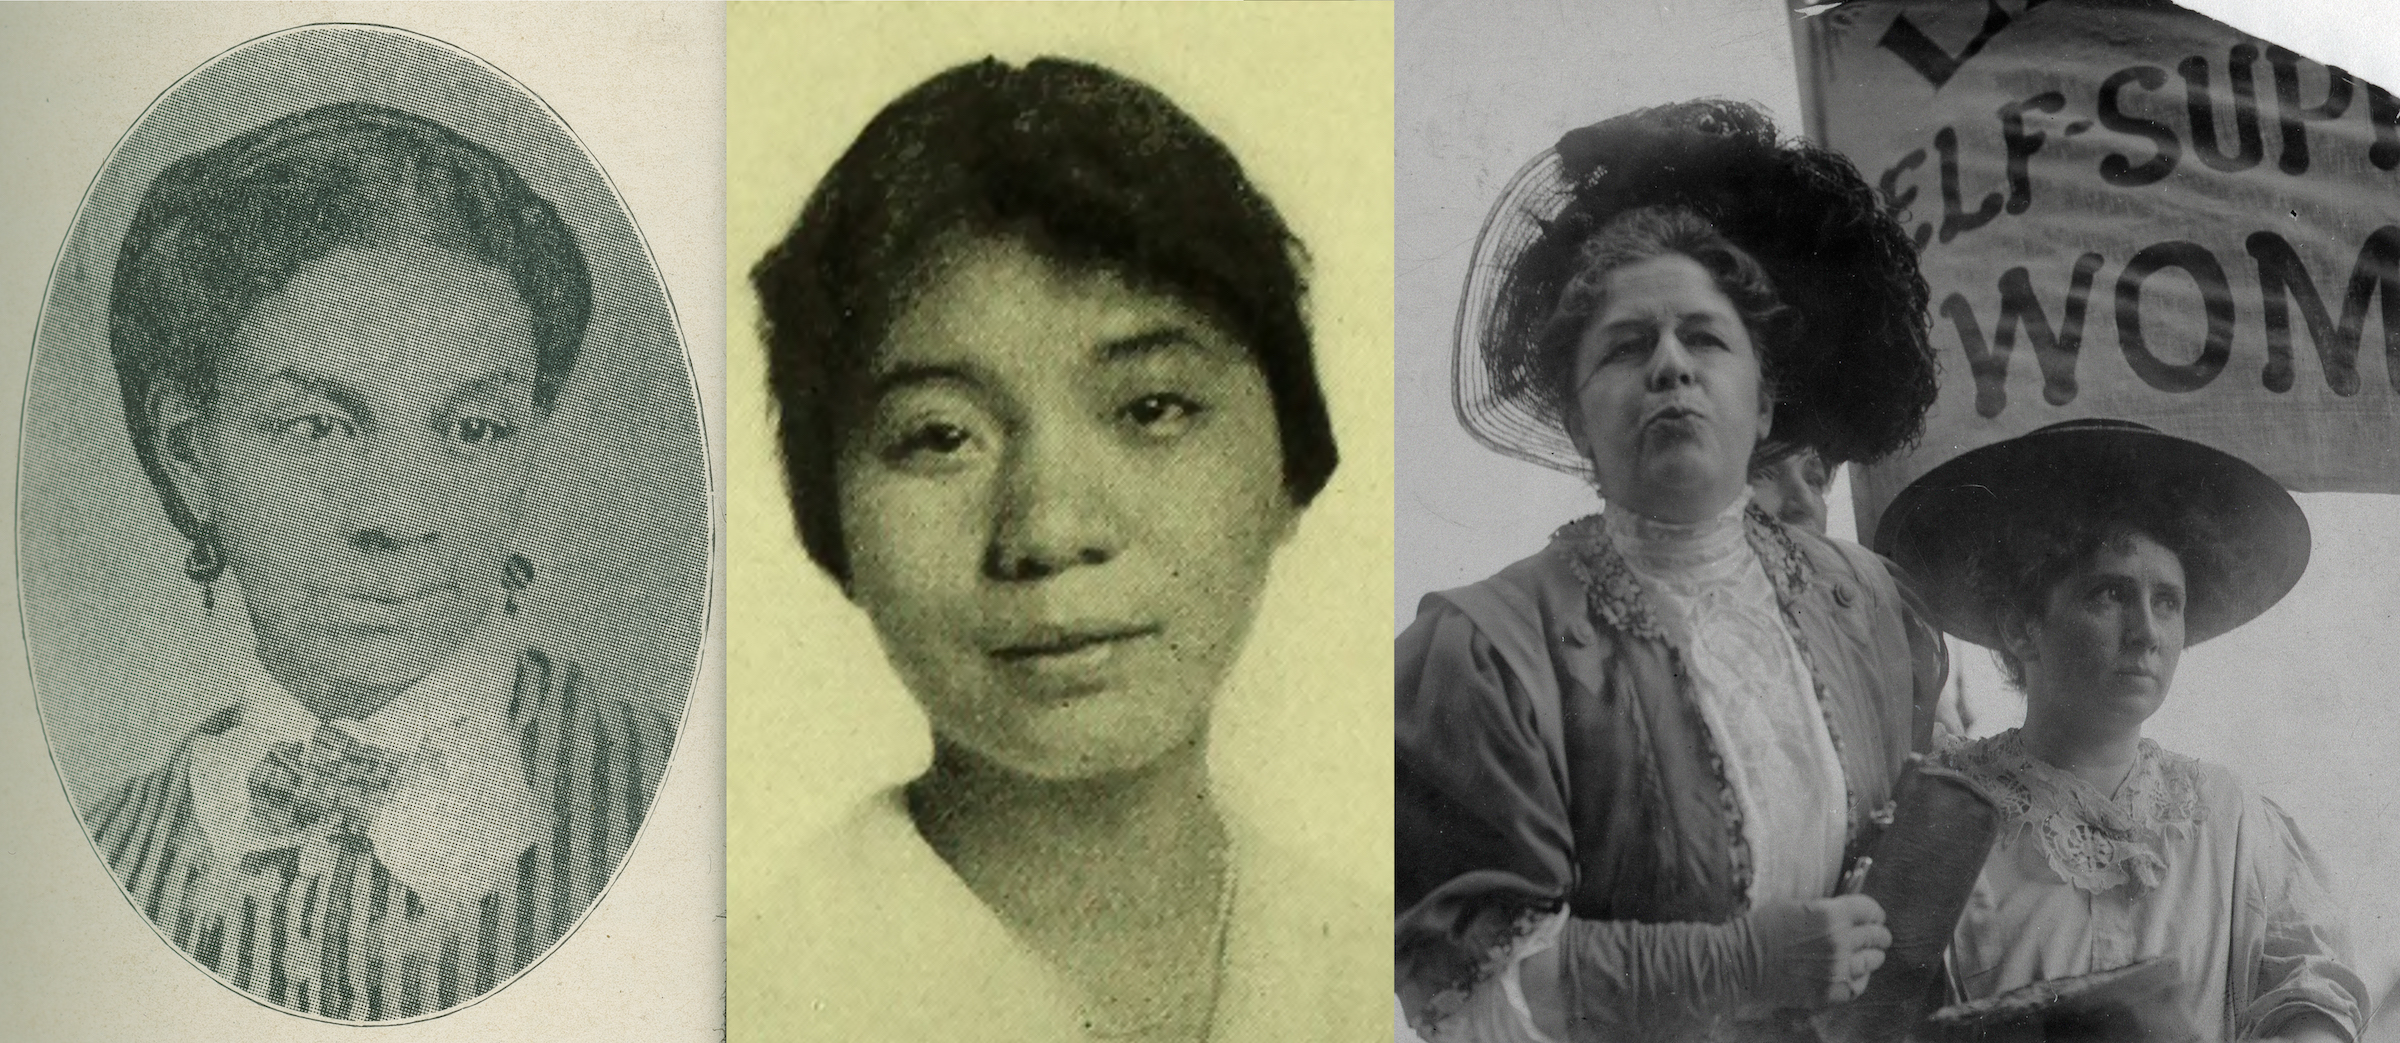 Banner image with portraits of Sarah J.S. Tompkins Garnet and Mabel Lee, and image of Harriot Stanton Blatch and Rose Schneiderman